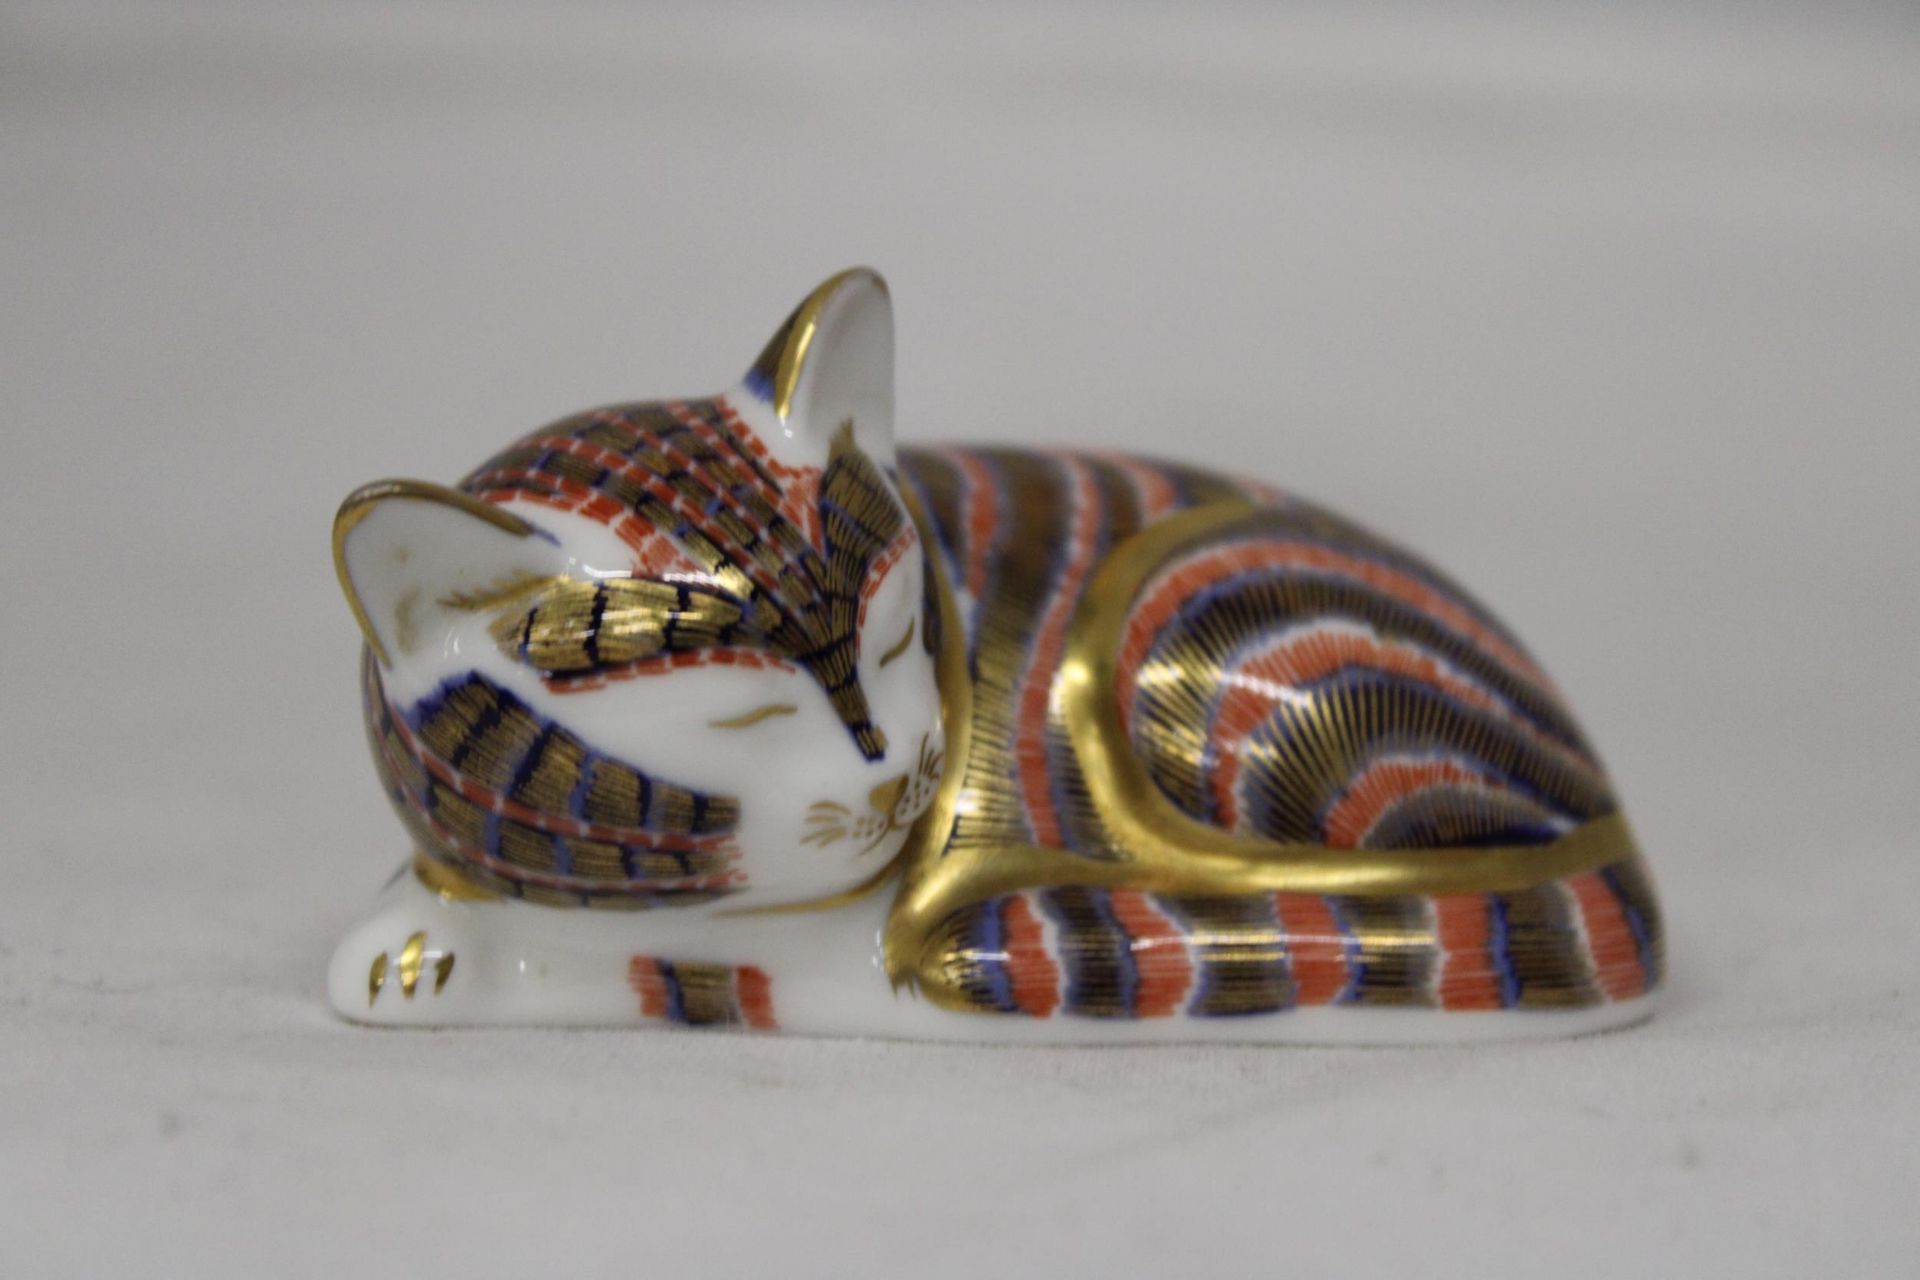 A ROYAL CROWN DERBY SLEEPING CAT (FIRSTS) - Image 2 of 6